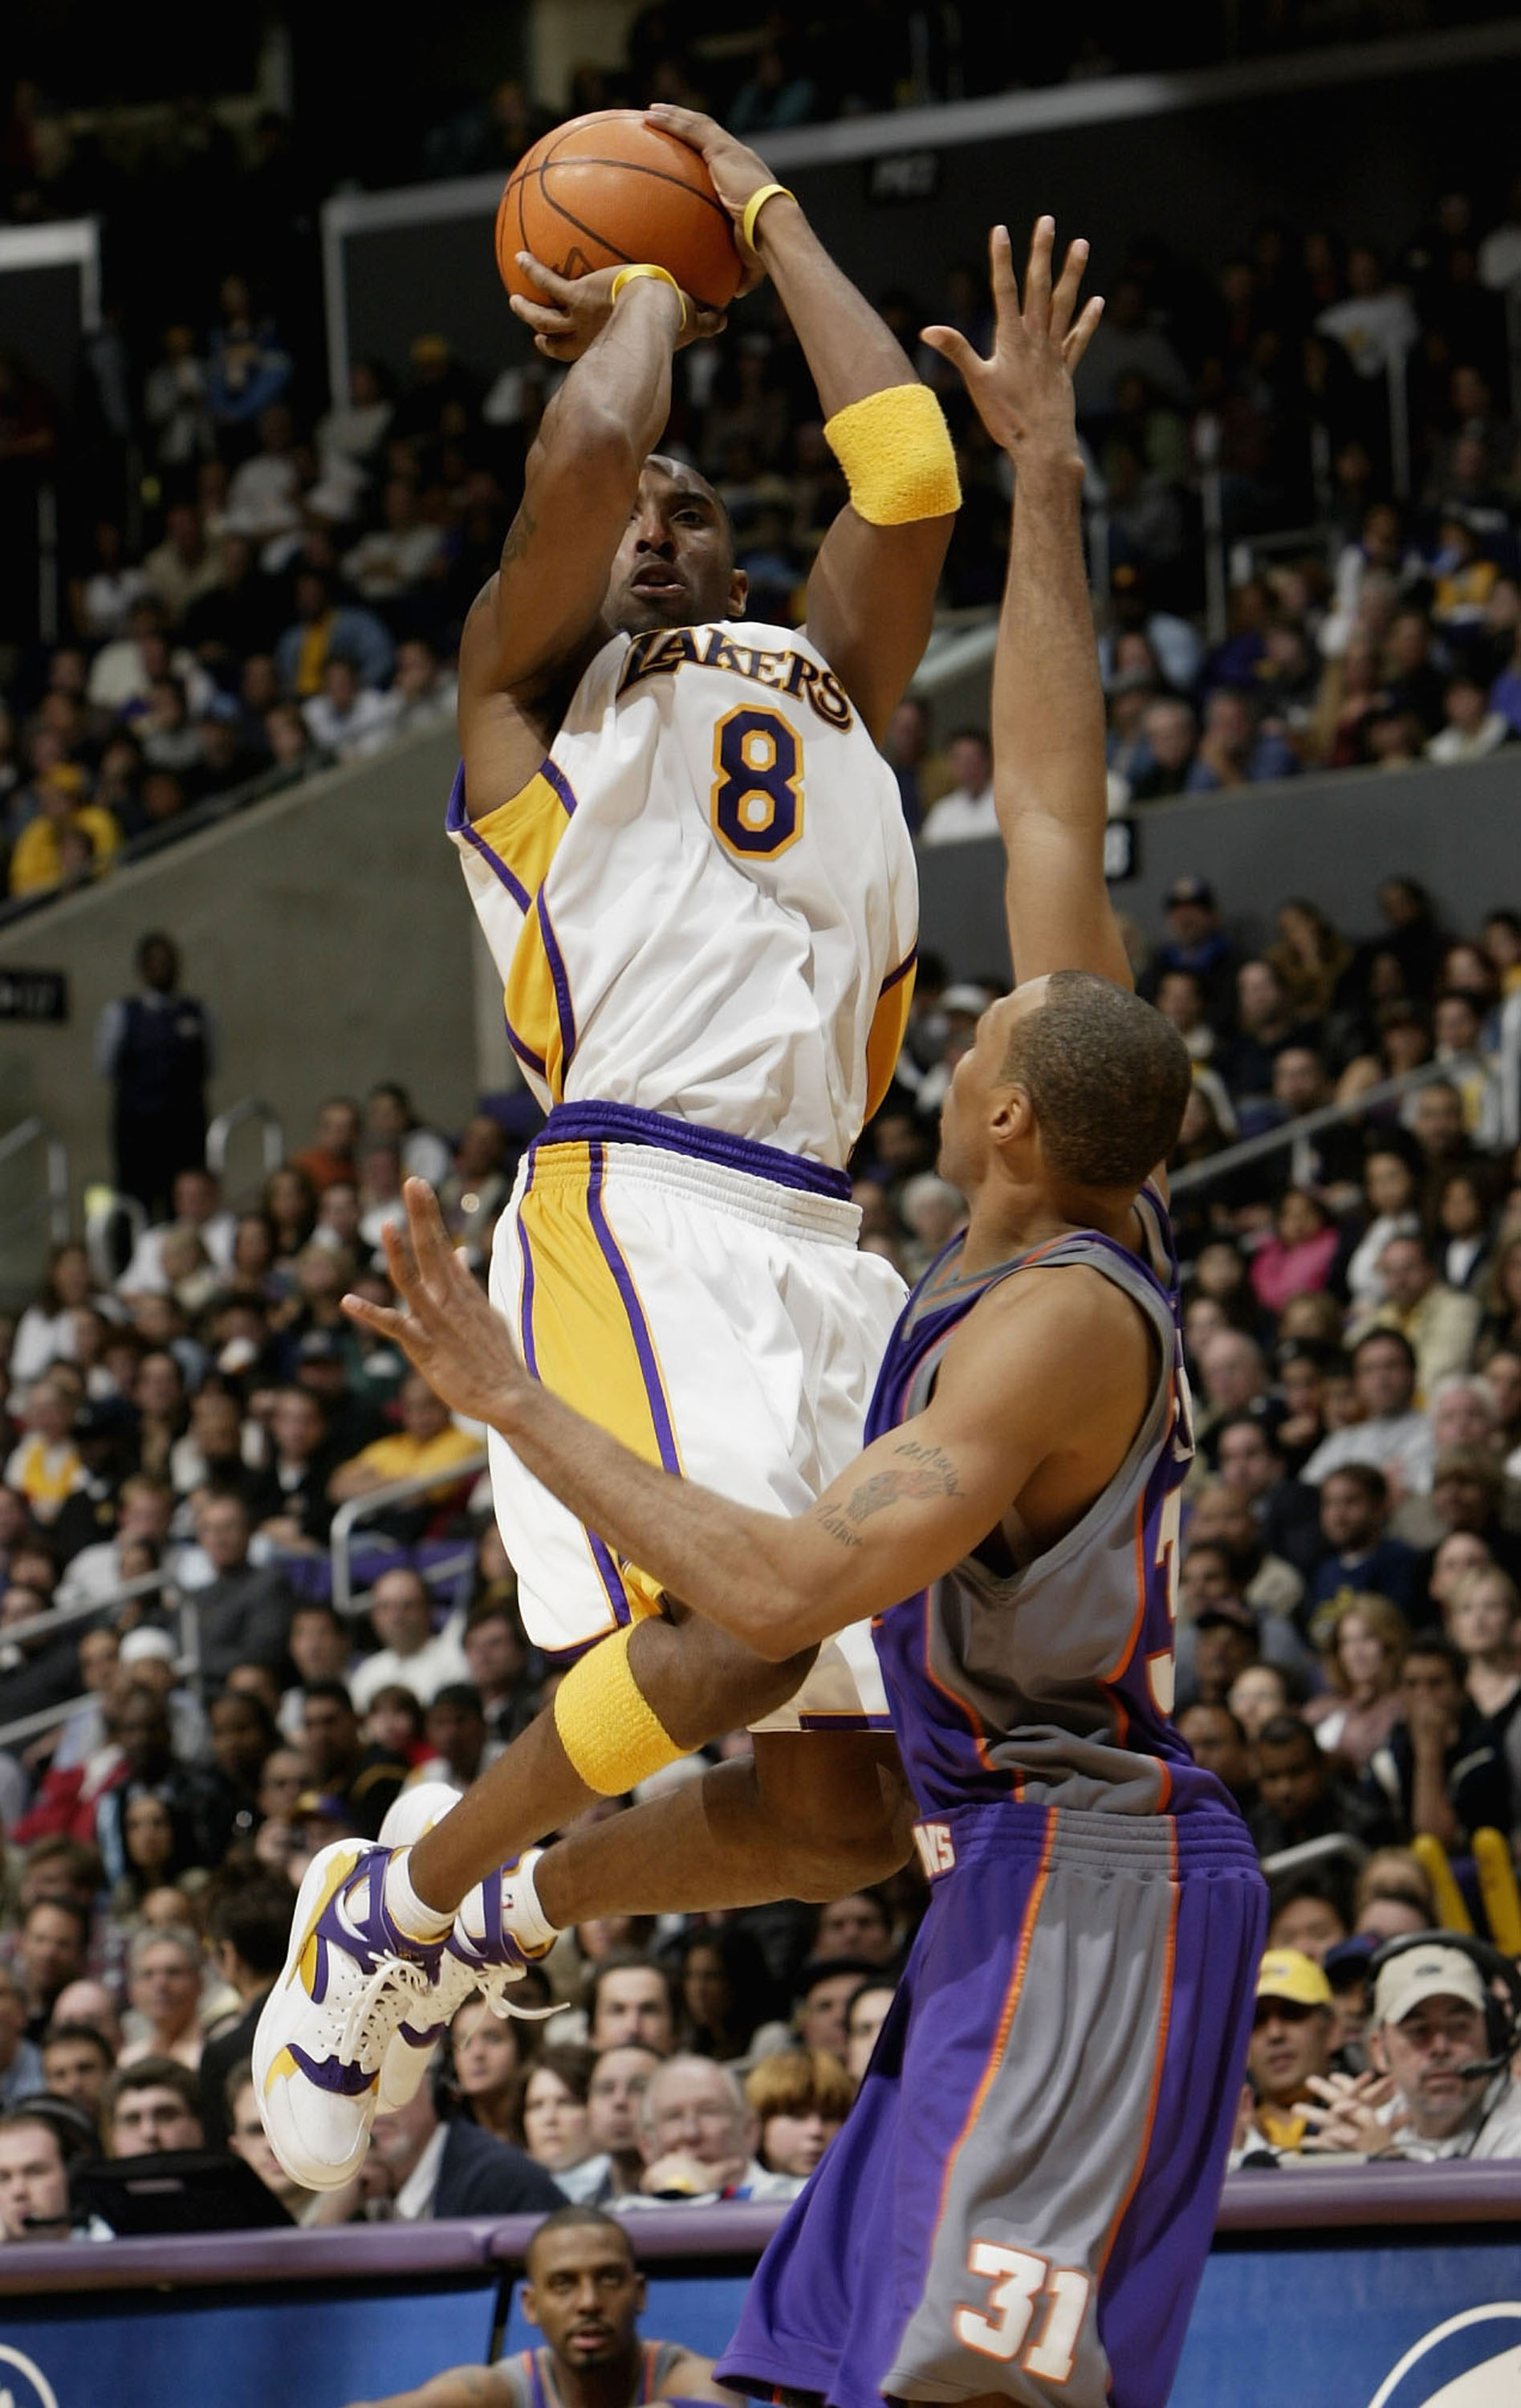 LOS ANGELES - DECEMBER 21:  Kobe Bryant #8 of the Los Angeles Lakers takes a shot over Shawn Marion #31 of the Phoenix Suns on December 21, 2003 at Staples Center in Los Angeles, California.  The Lakers won 107-101.   NOTE TO USER: User expressly acknowle